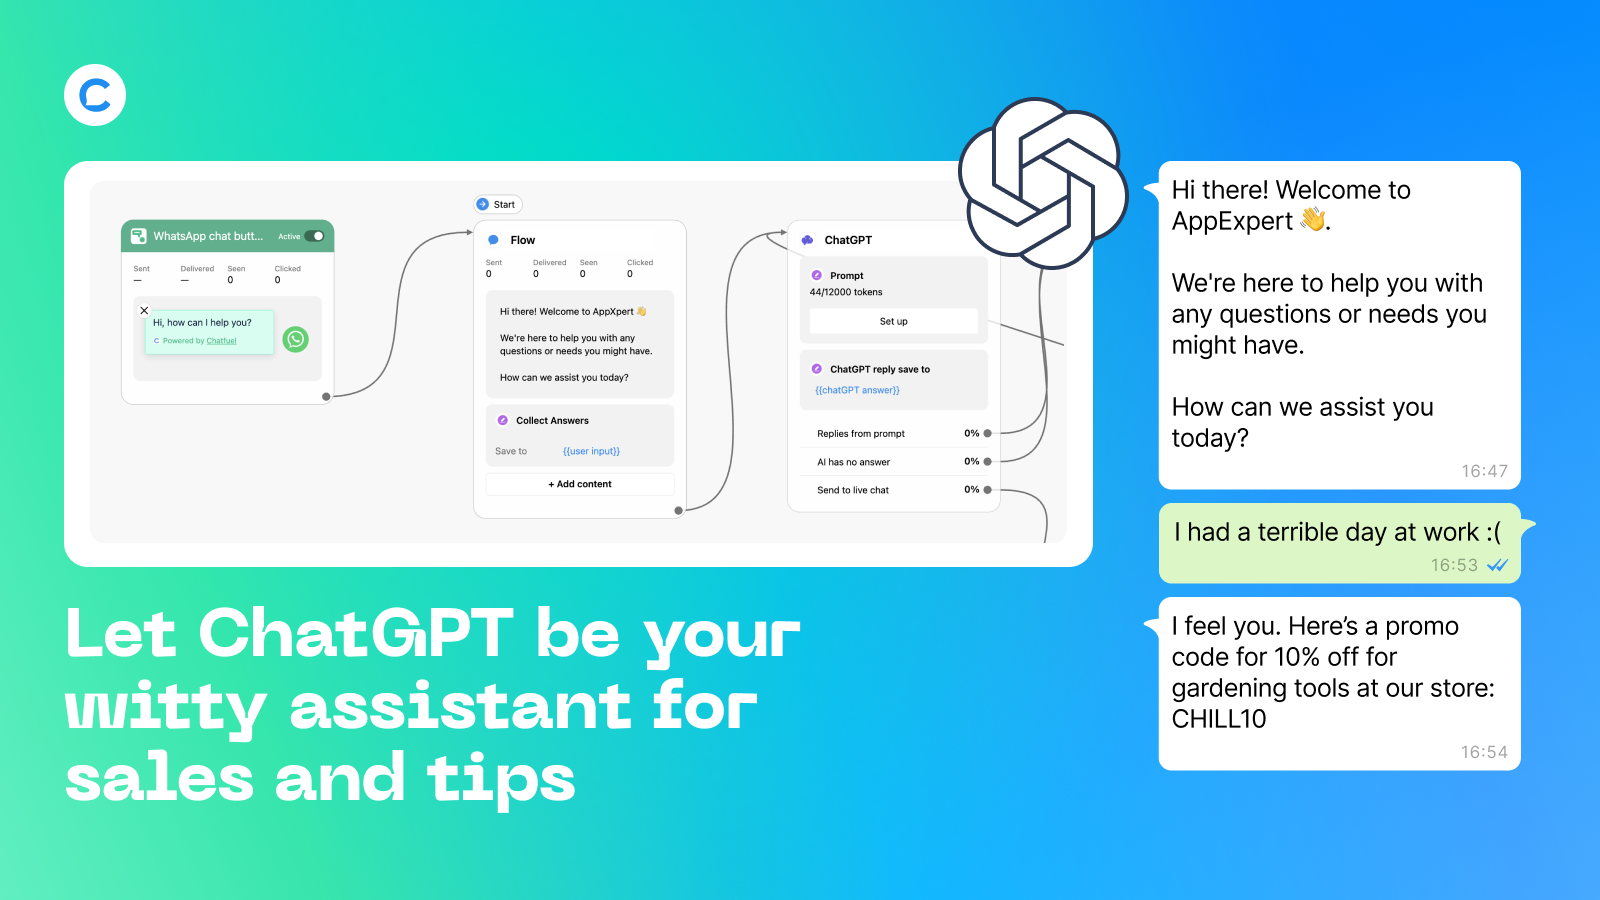 Let ChatGPT be your witty assistant for sales and tips